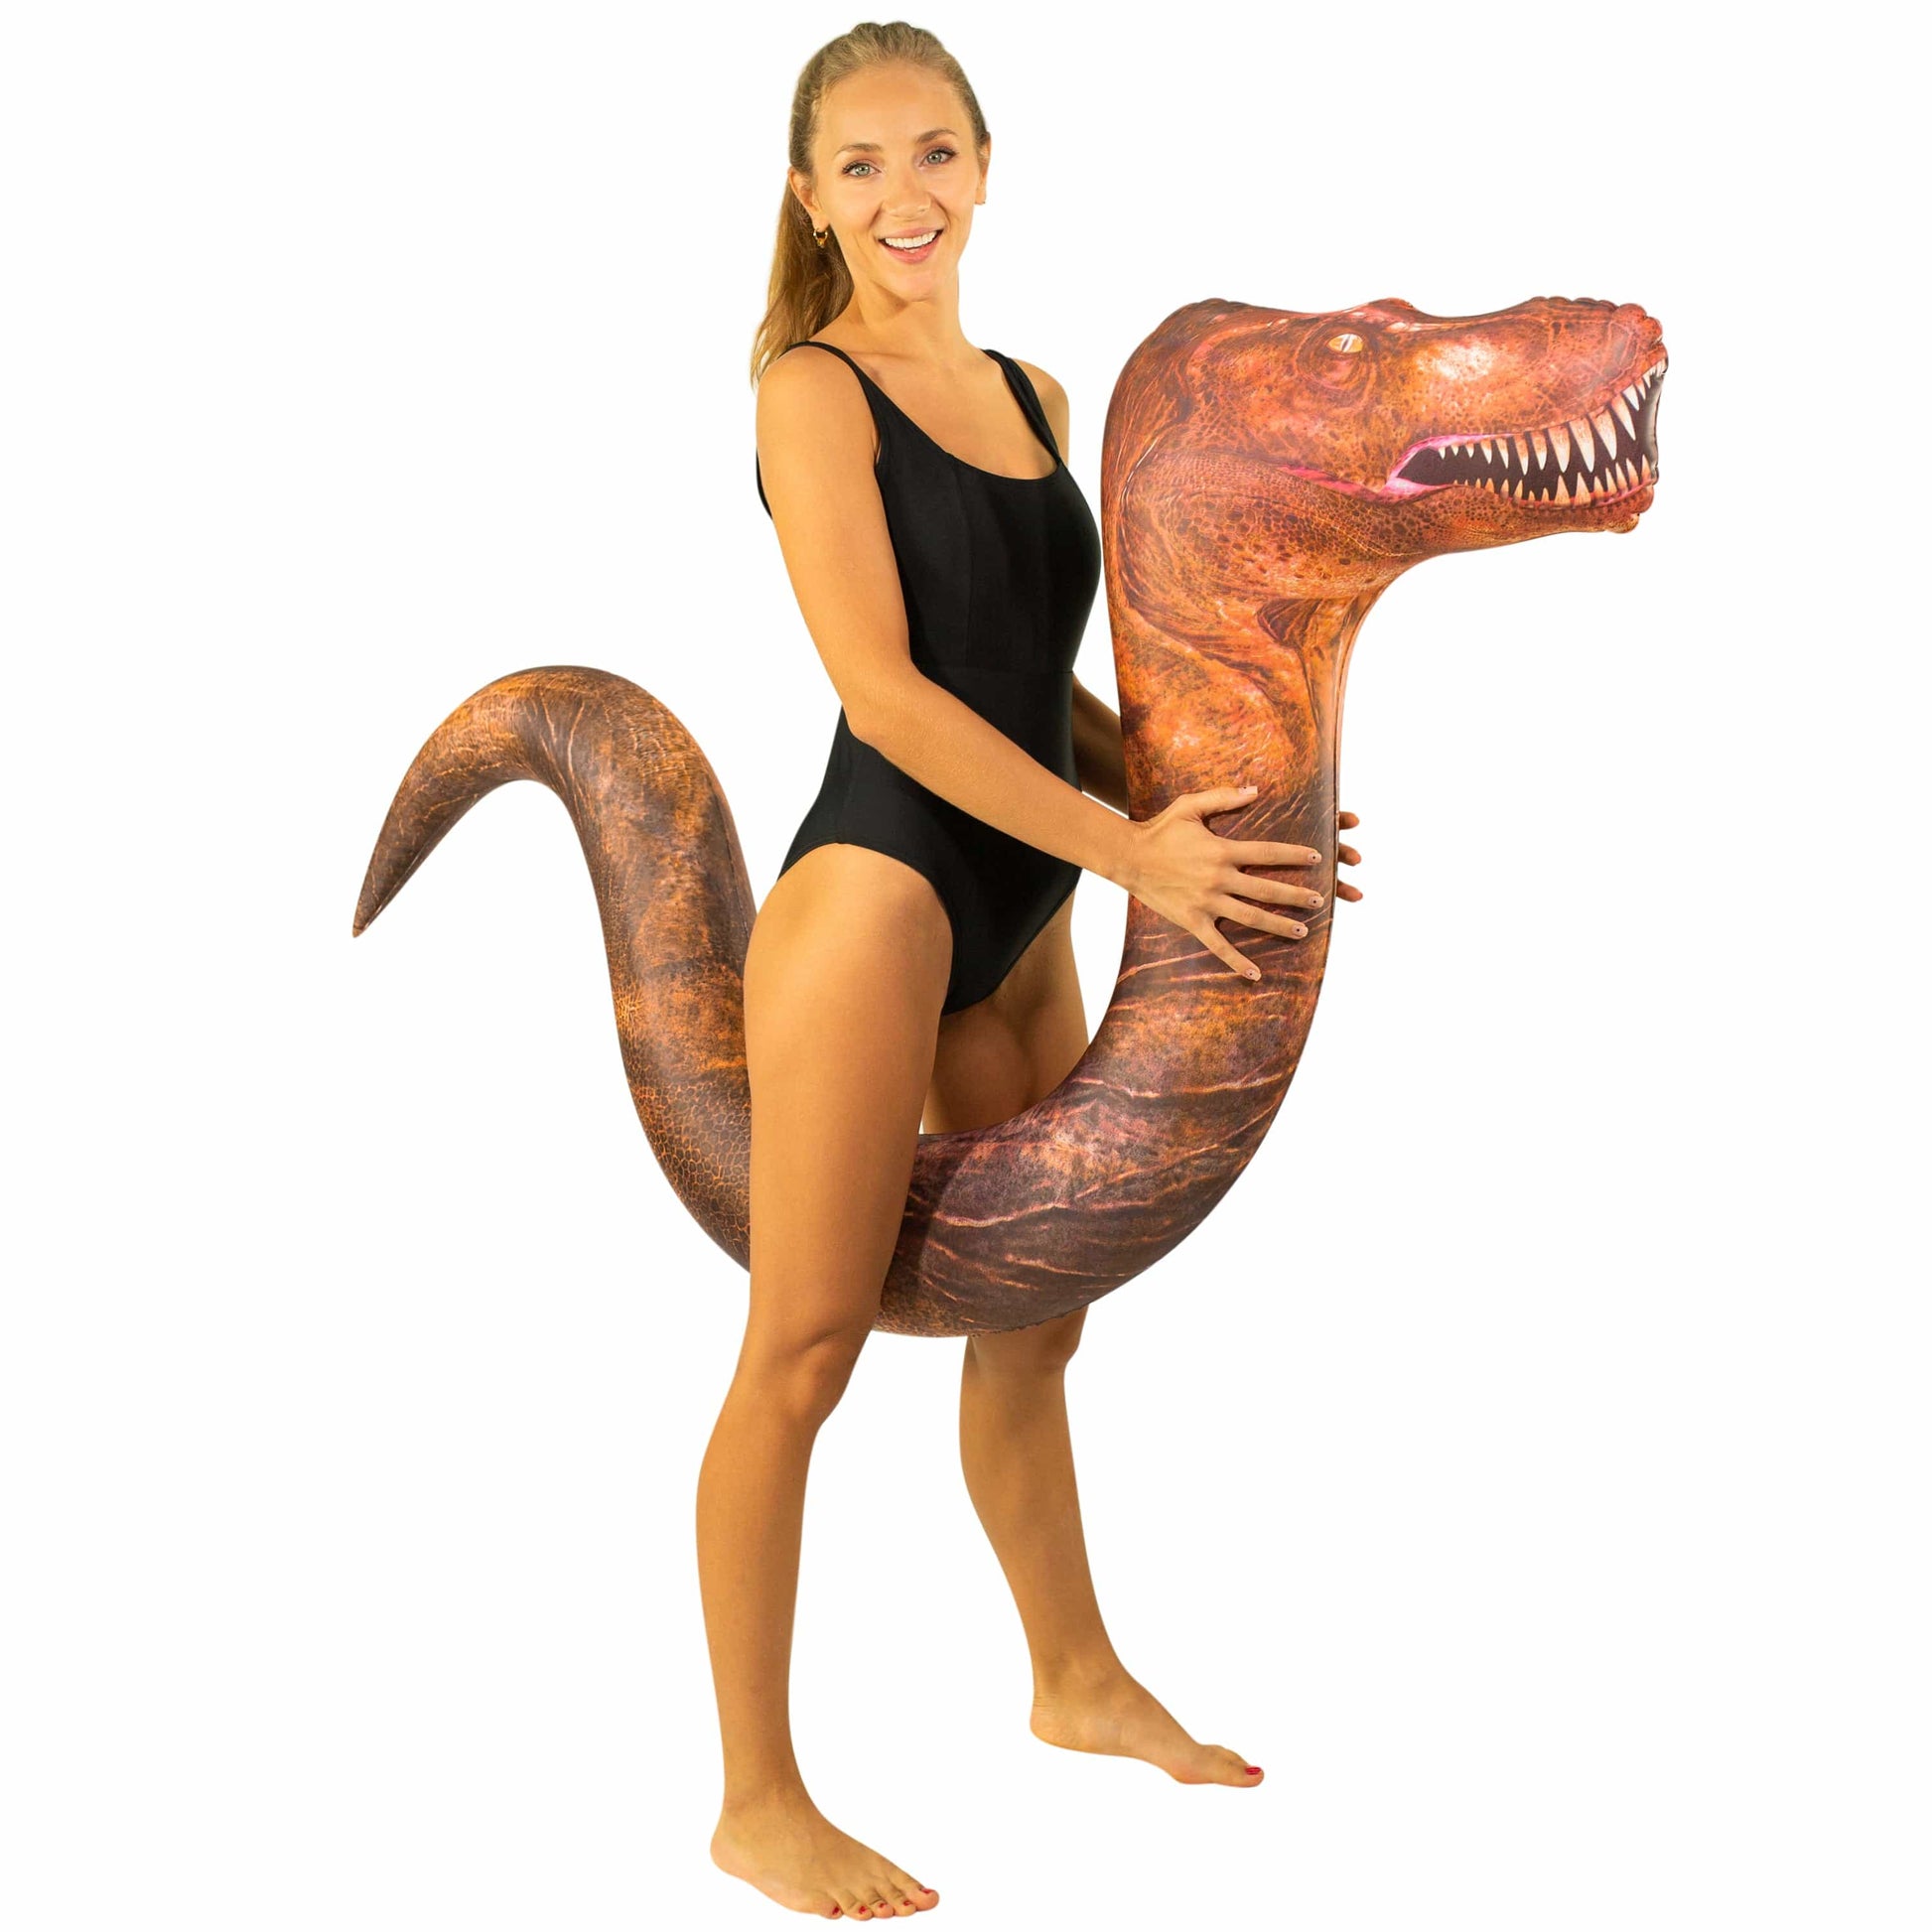 Inflatable T-Rex Pool Ride On Noodle